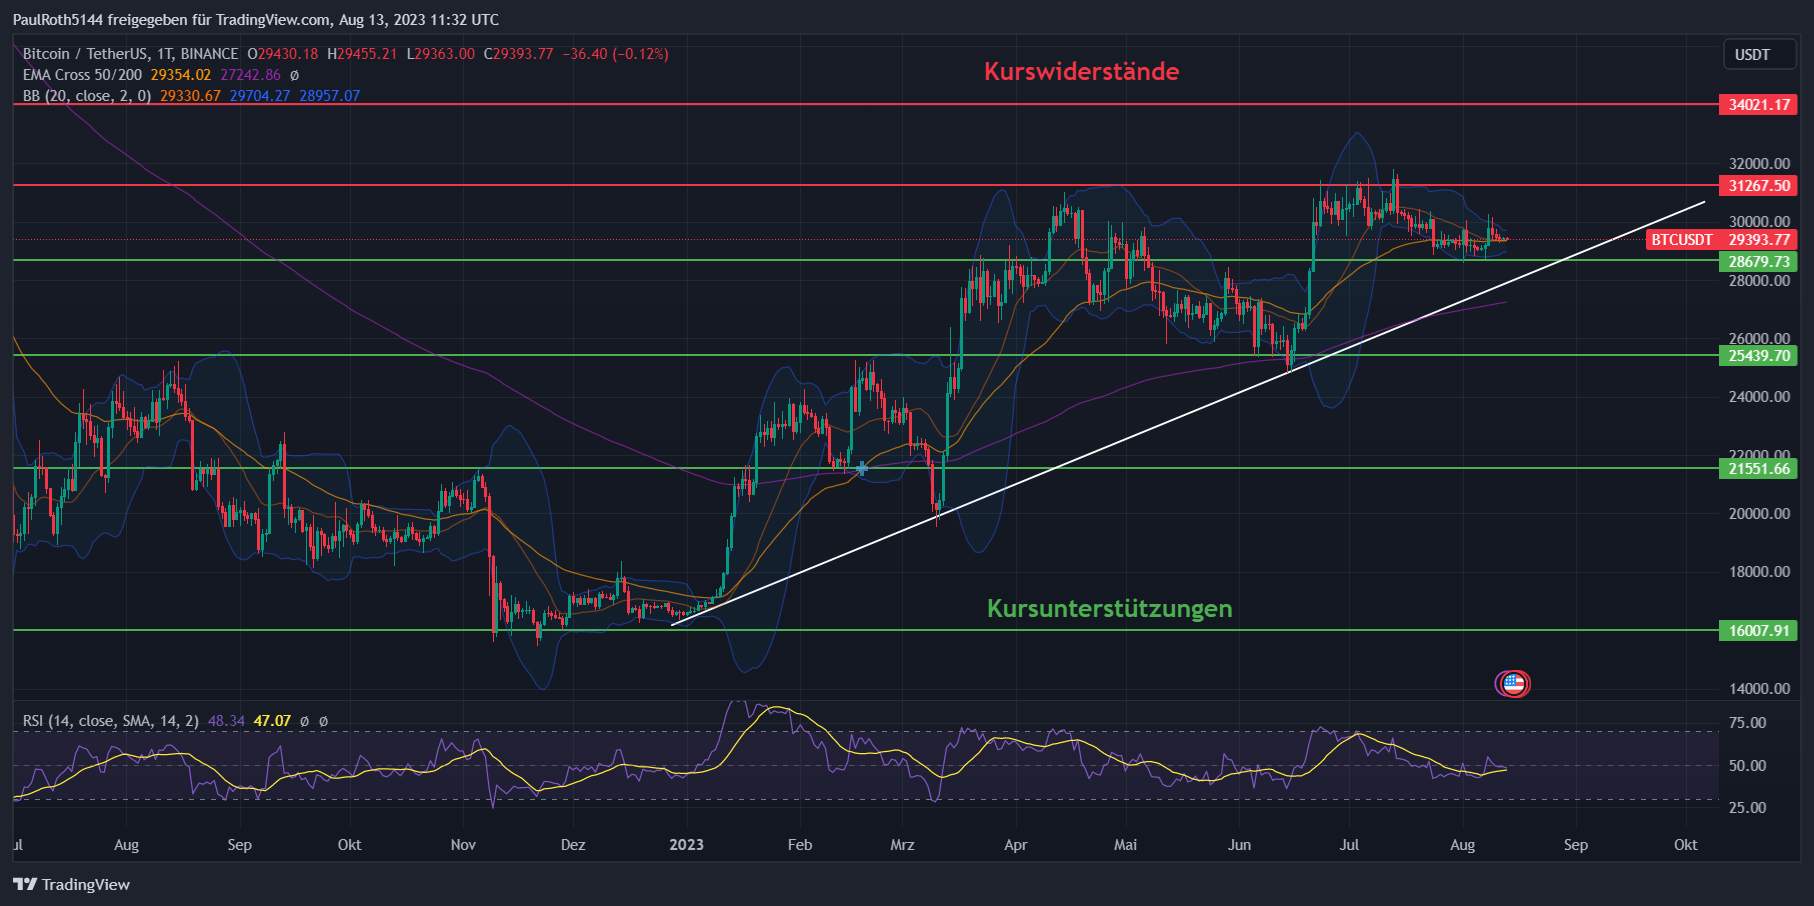 BTC-Kurs Chartanalyse in Tagesdarstellung (Stand: 27.06.23)